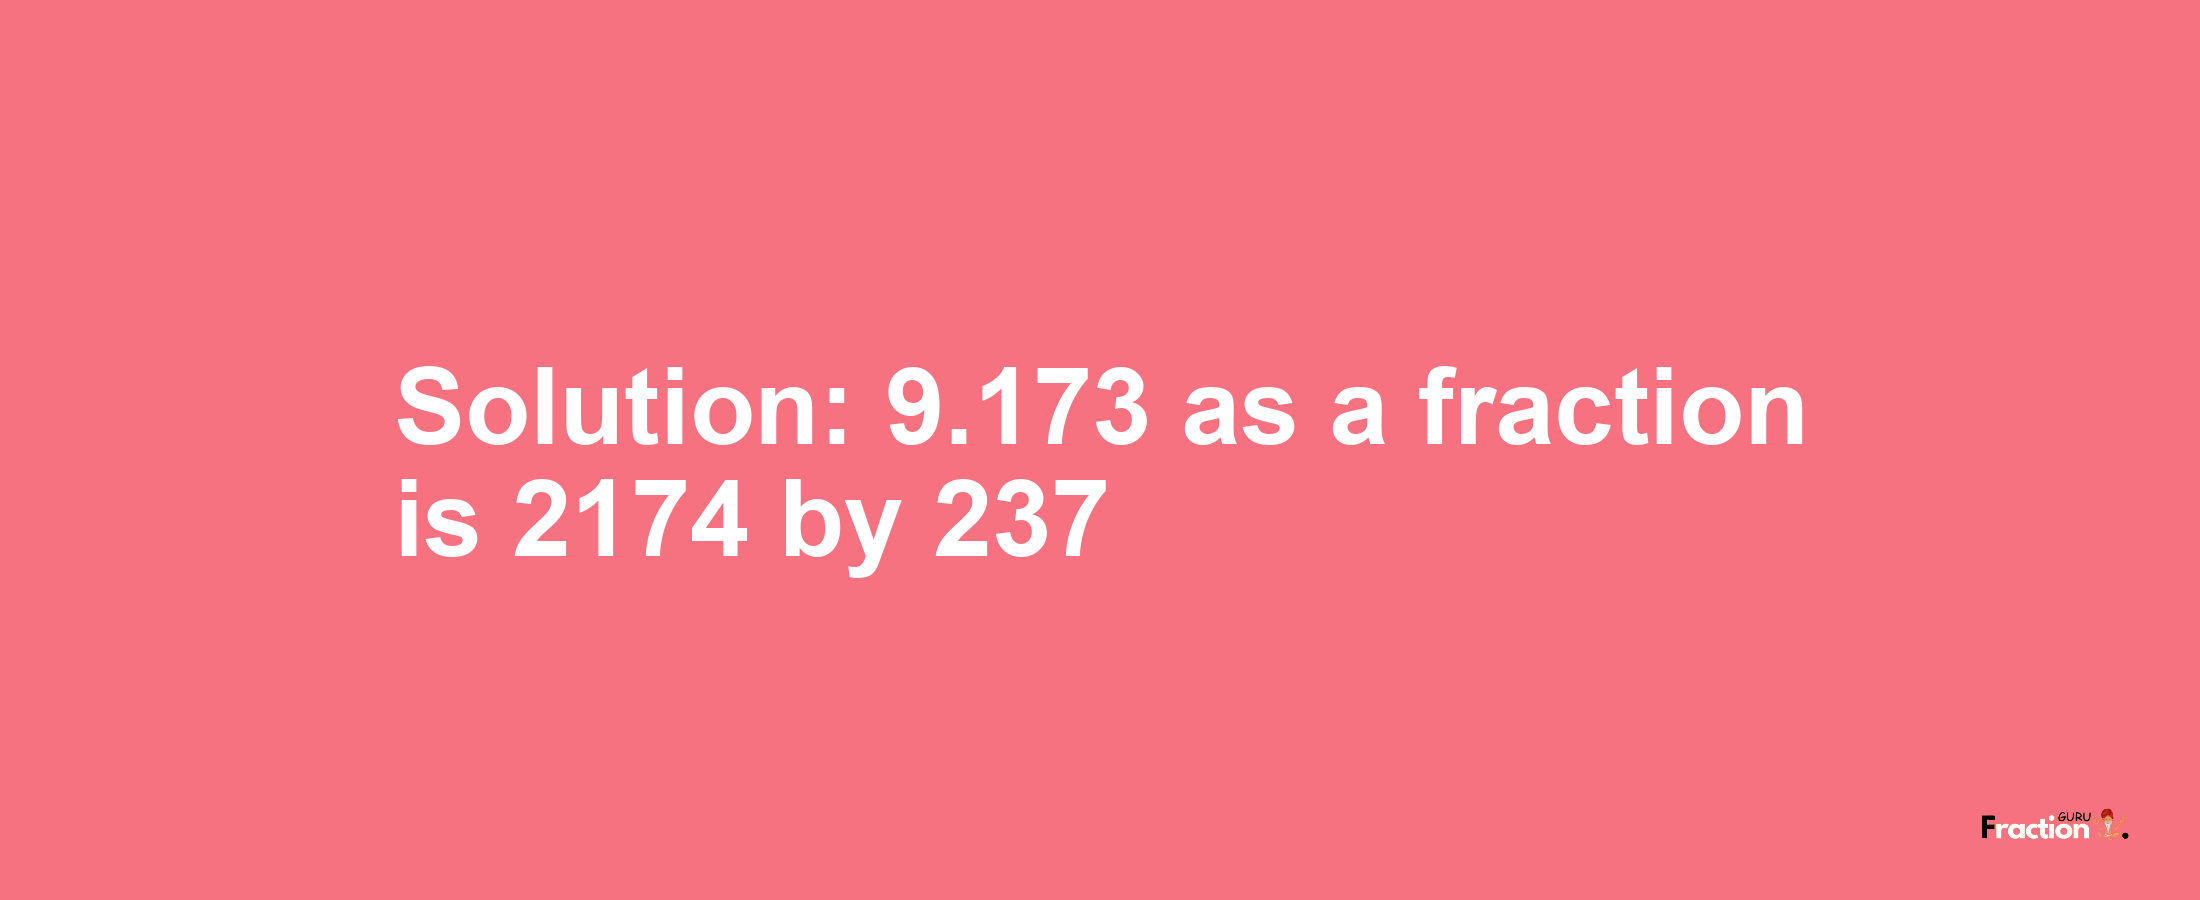 Solution:9.173 as a fraction is 2174/237